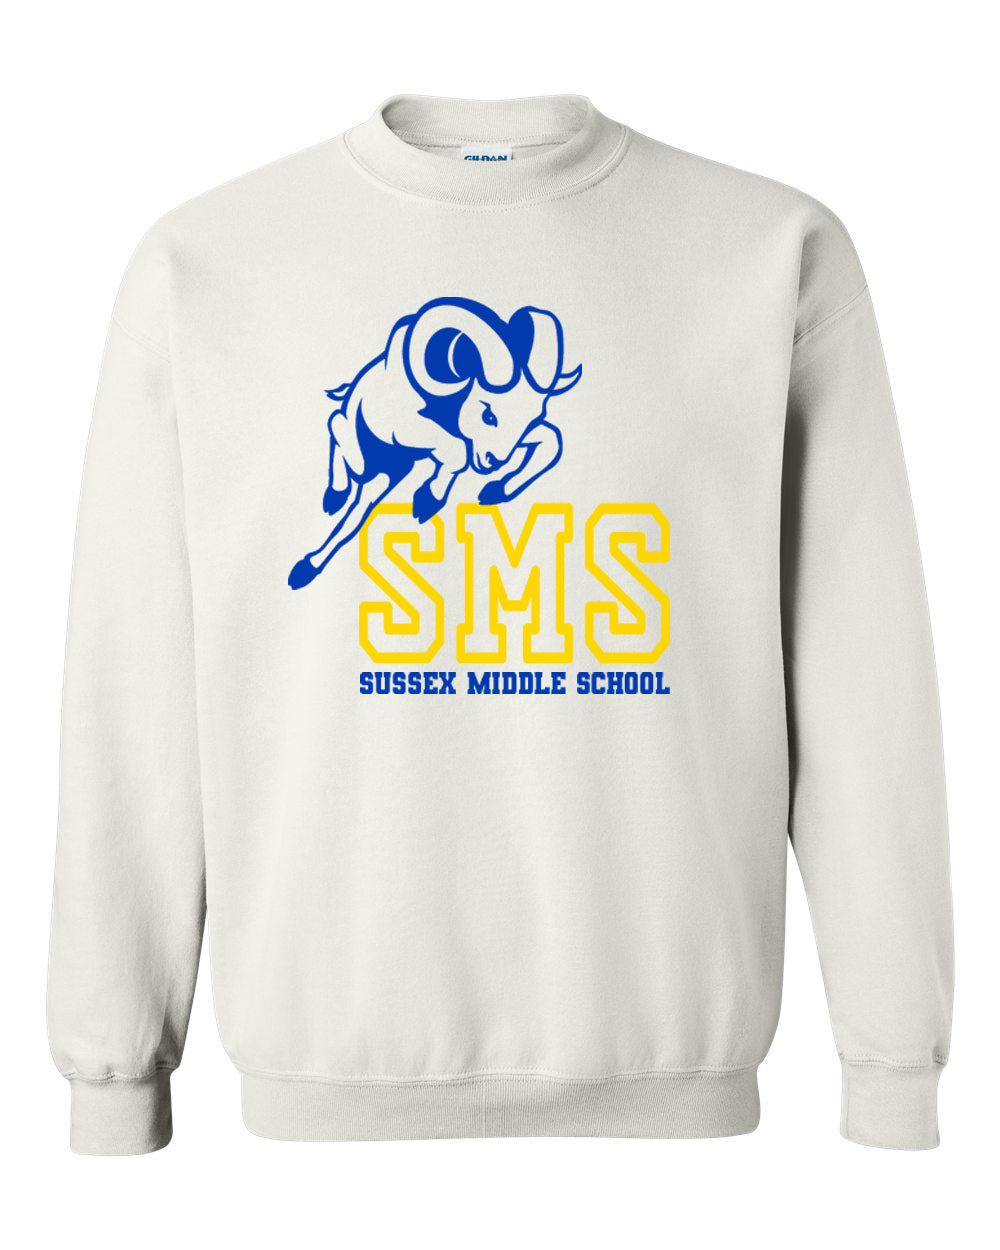 Sussex Middle Design 3 non hooded sweatshirt